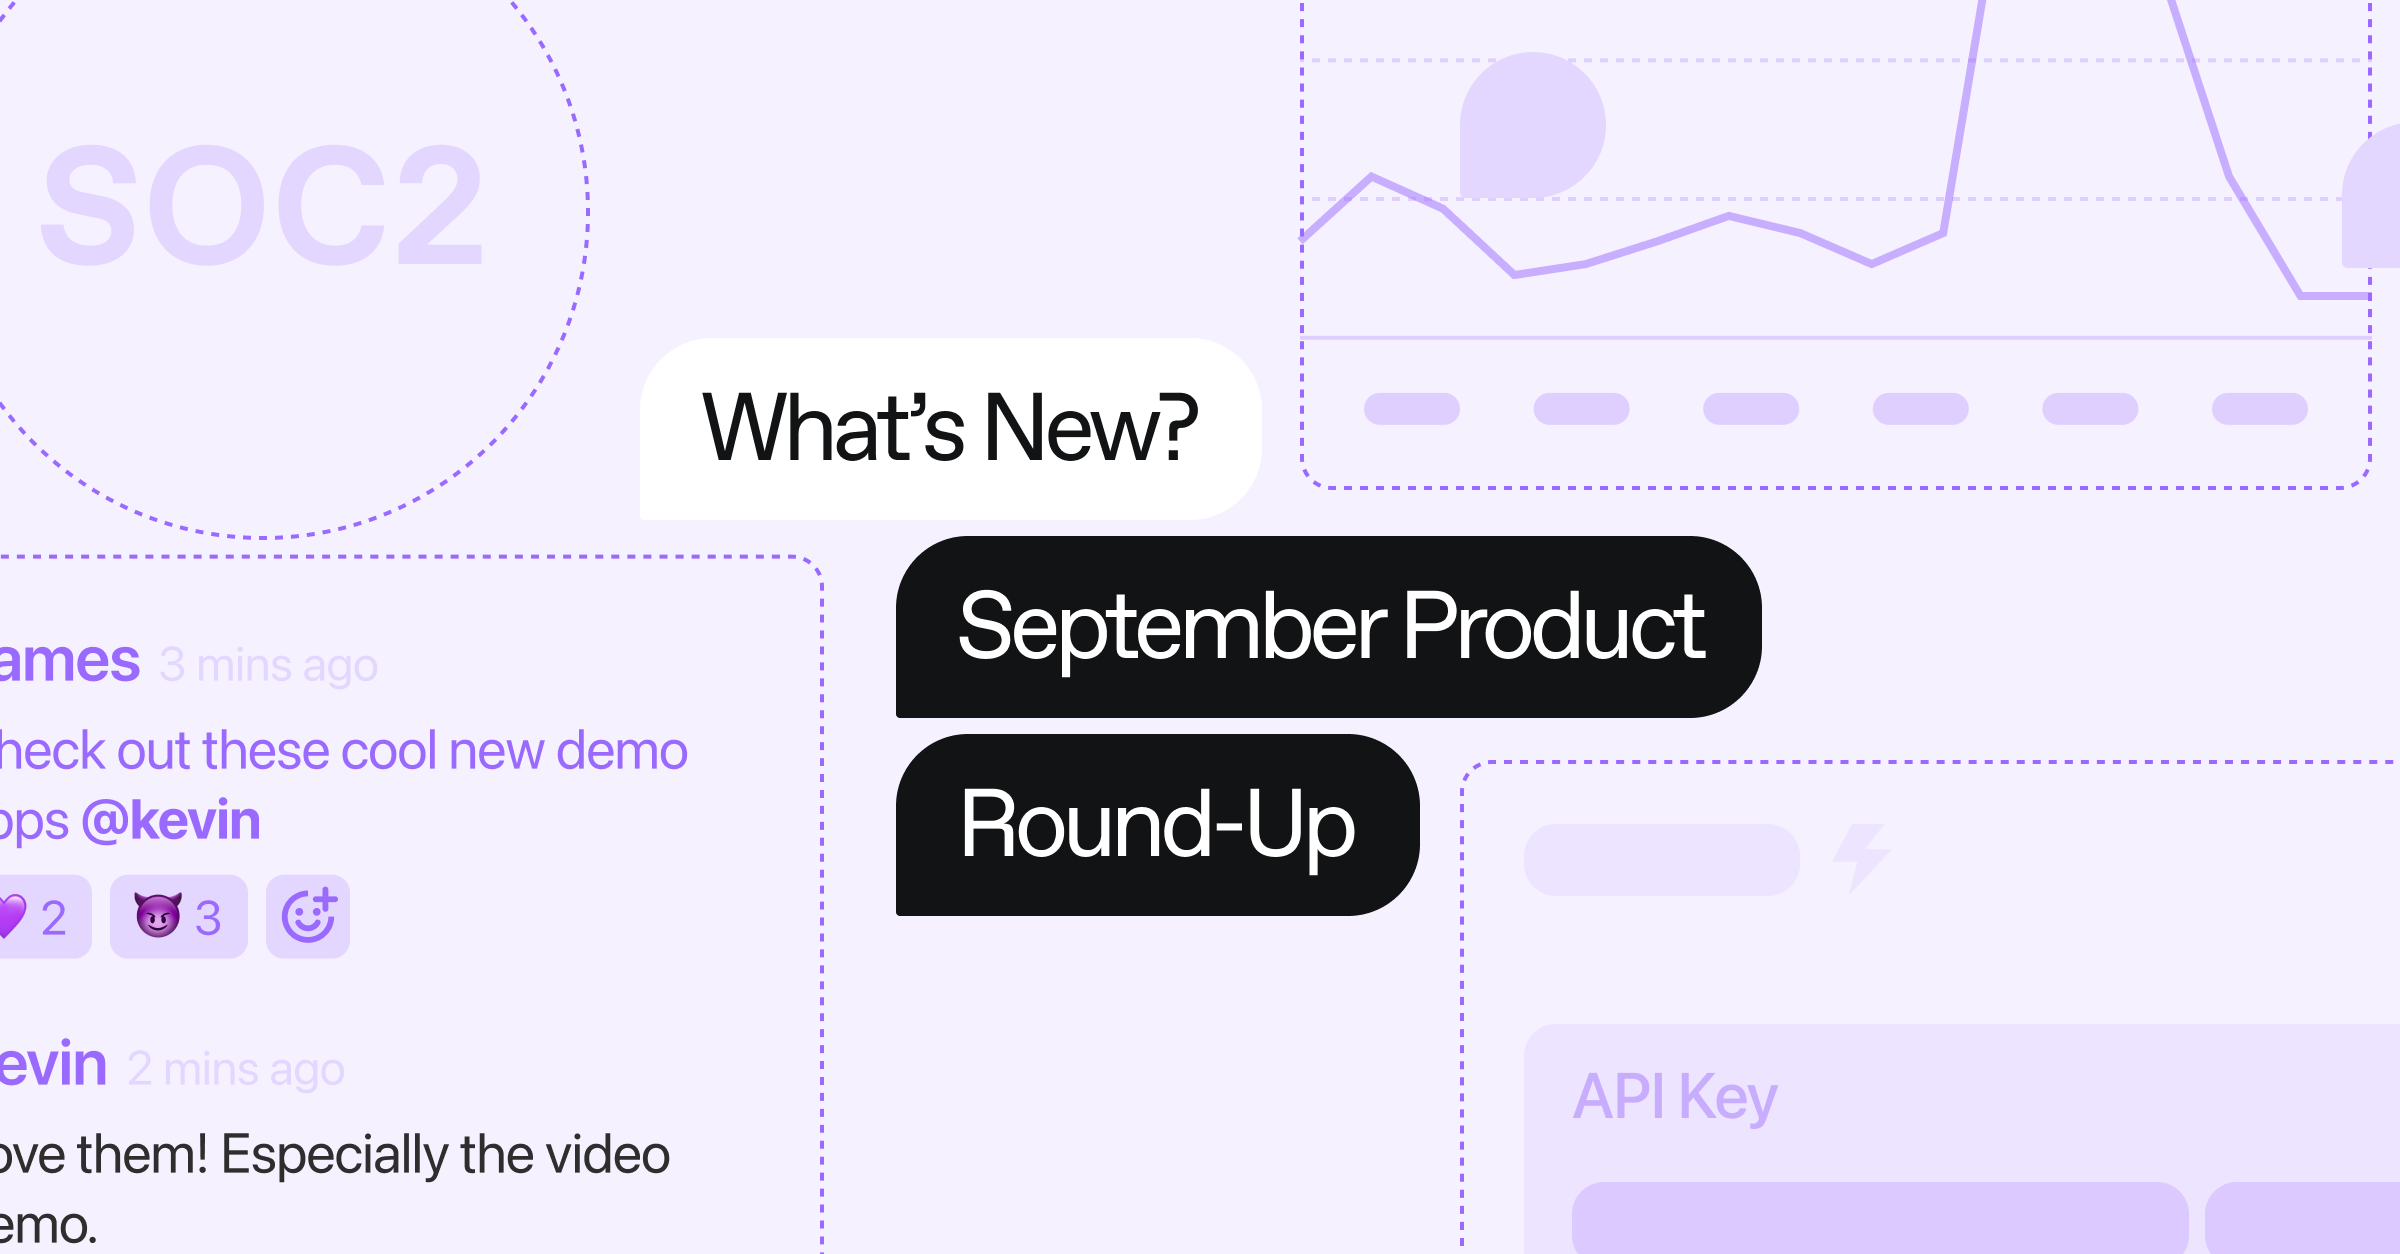 A graphic showing chat messages with reactions and the text "What's New? September Product Round-Up"